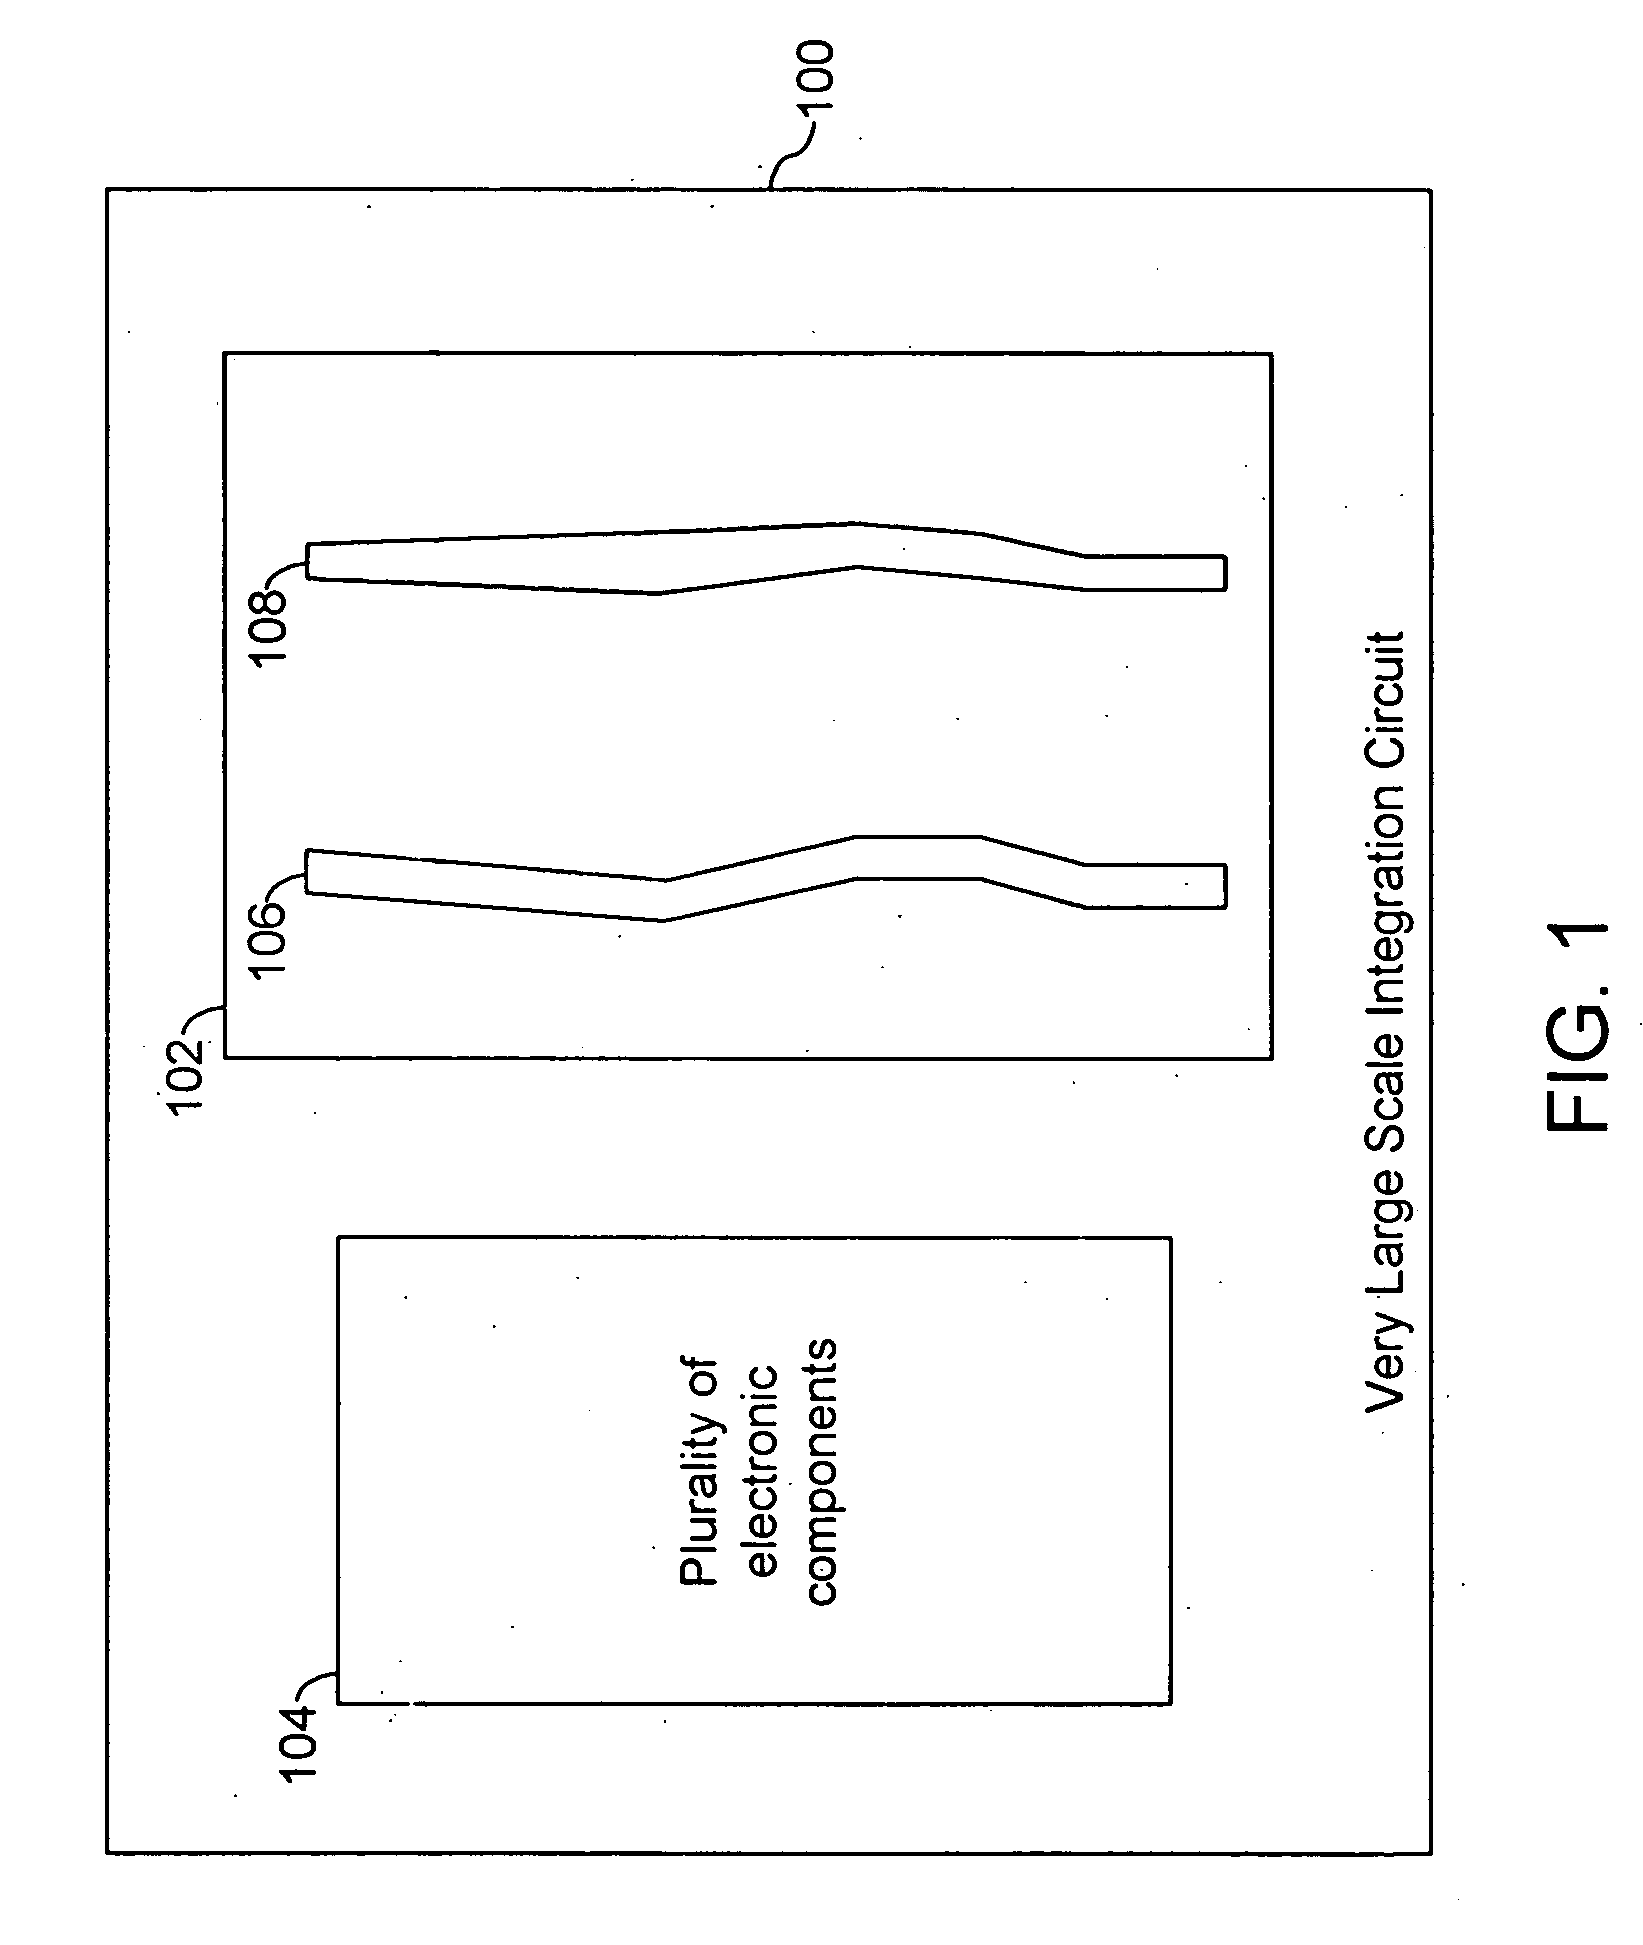 Method and system for reshaping metal wires in VLSI design